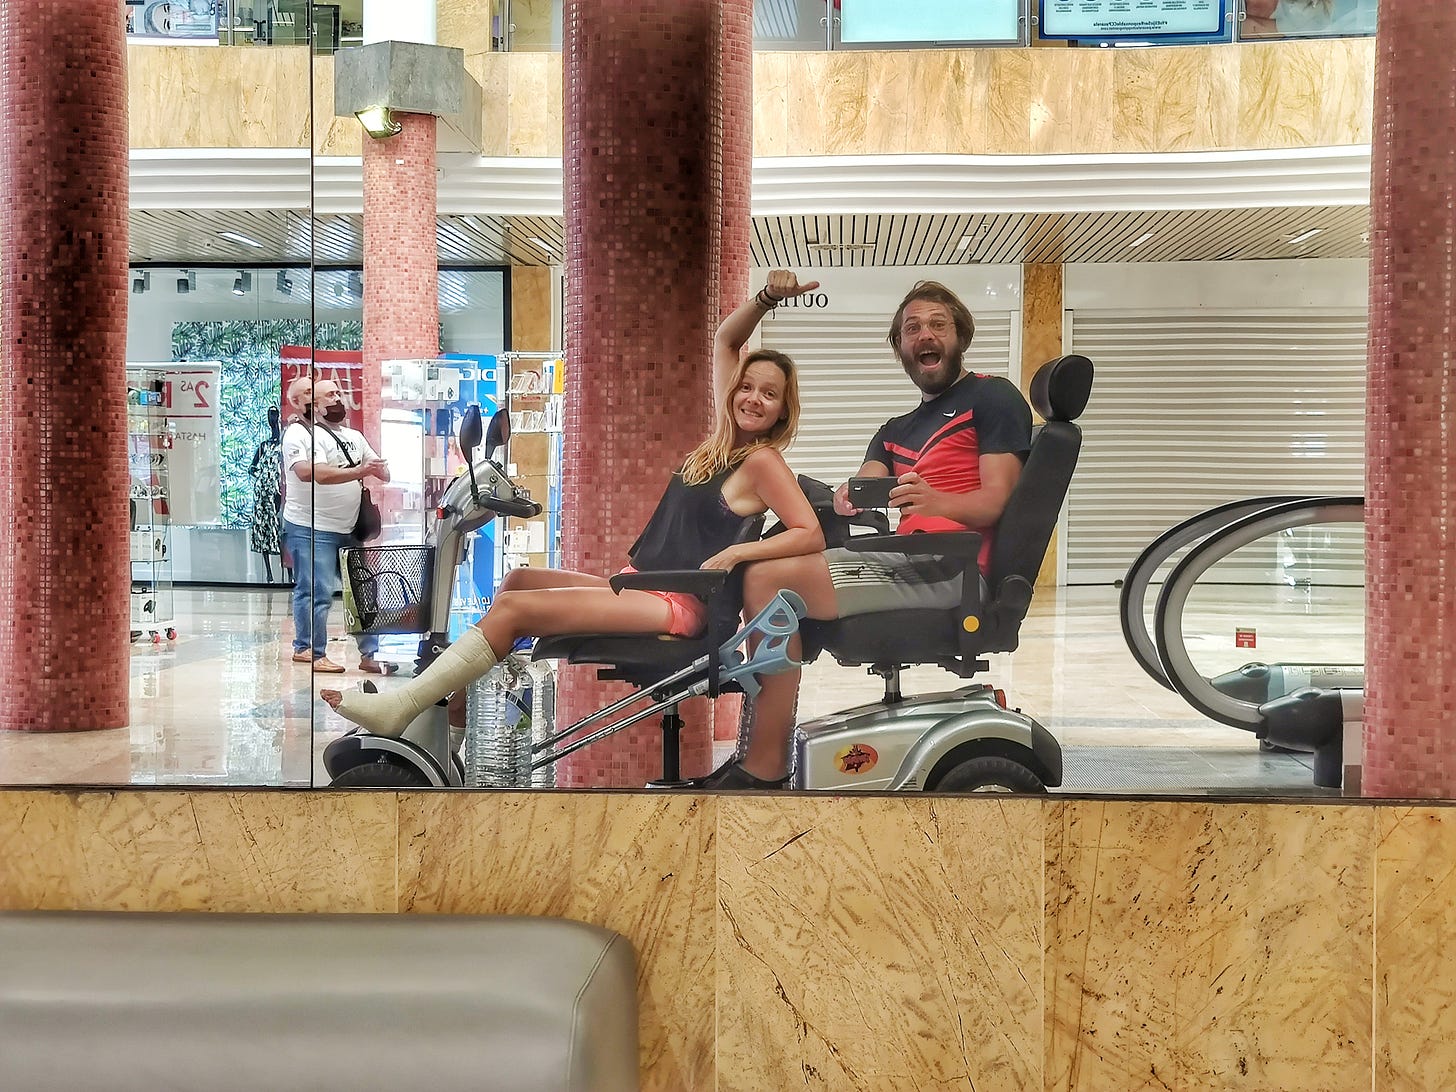 A hot couple riding an electrical scooter through a mall